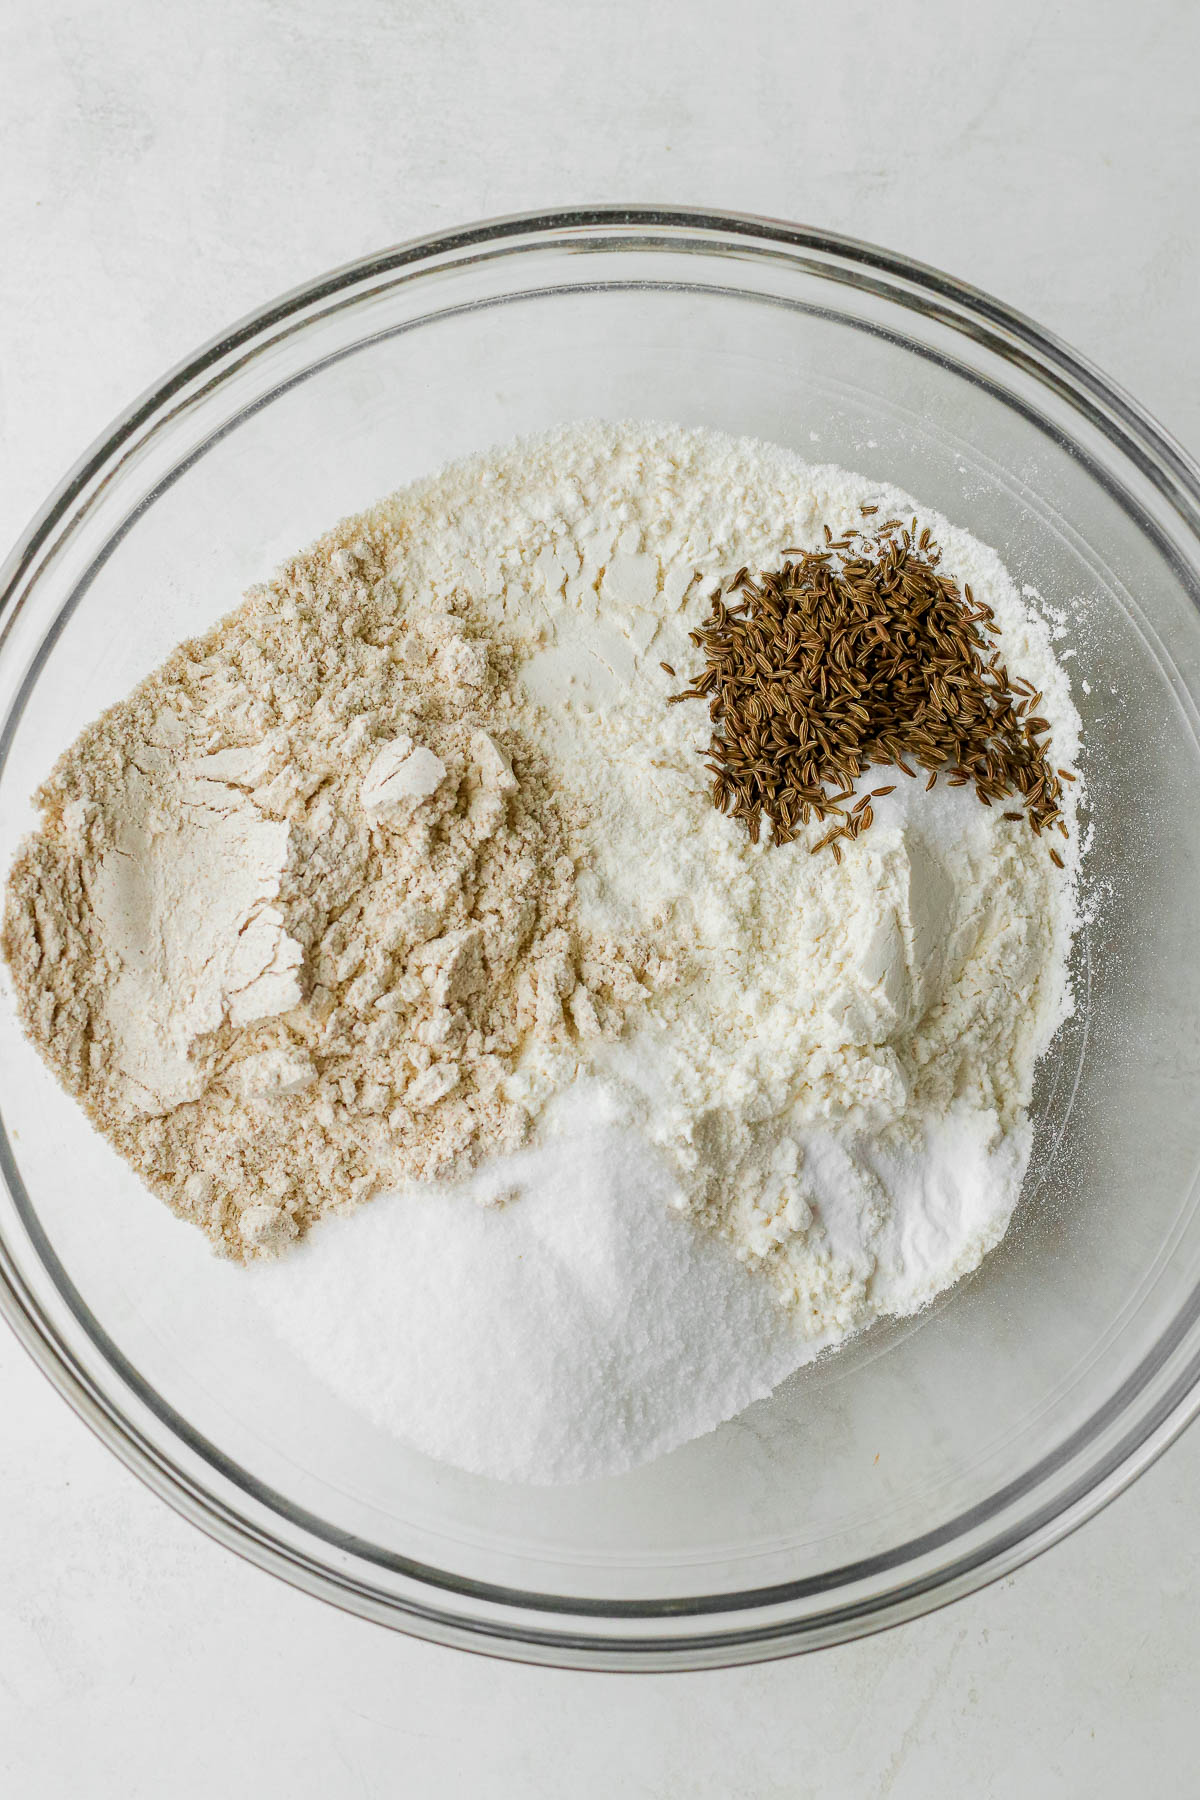 dry ingredients in a clear bowl.